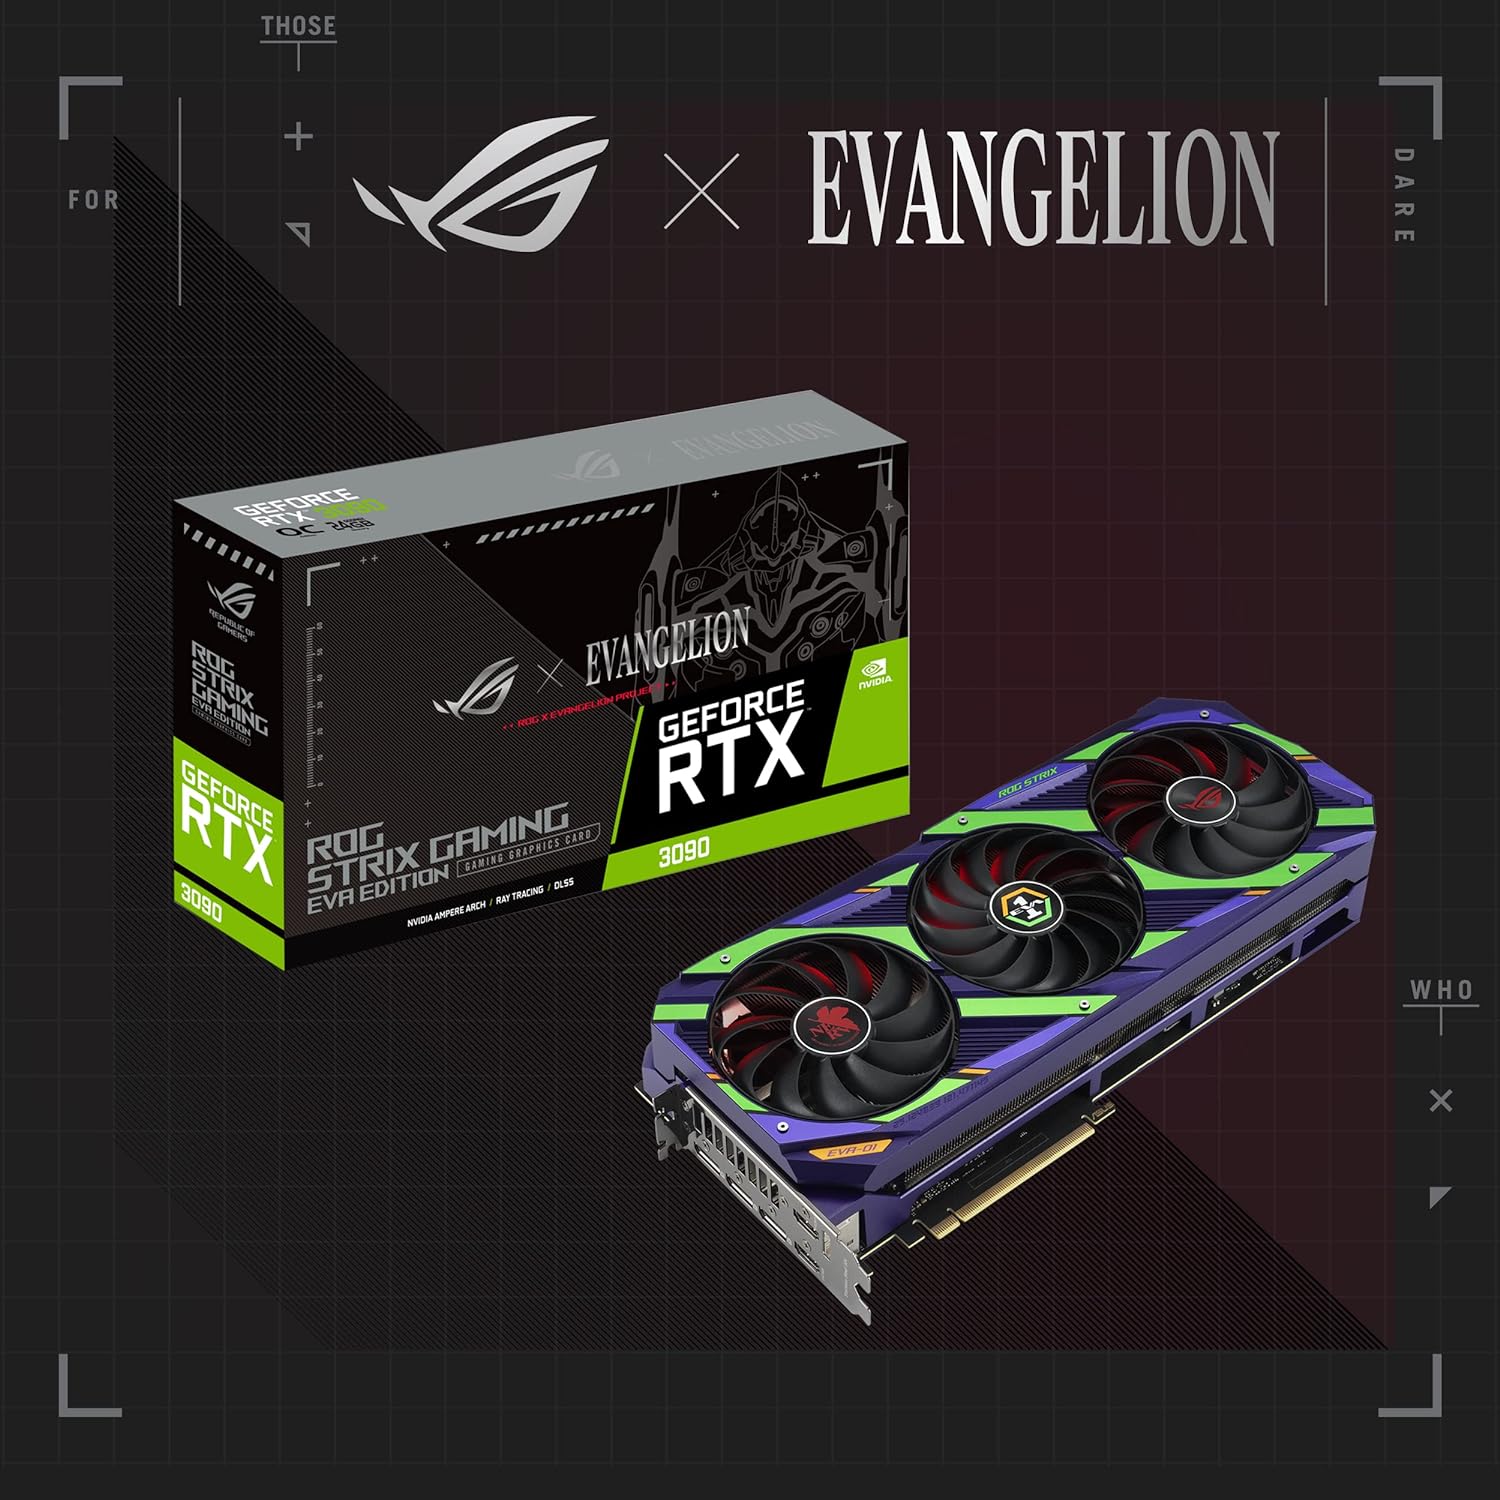 ASUS ROG Strix RTX 3090 EVA Edition: Ampere SM for world's fastest GPU with improved power efficiency. 0195553721226